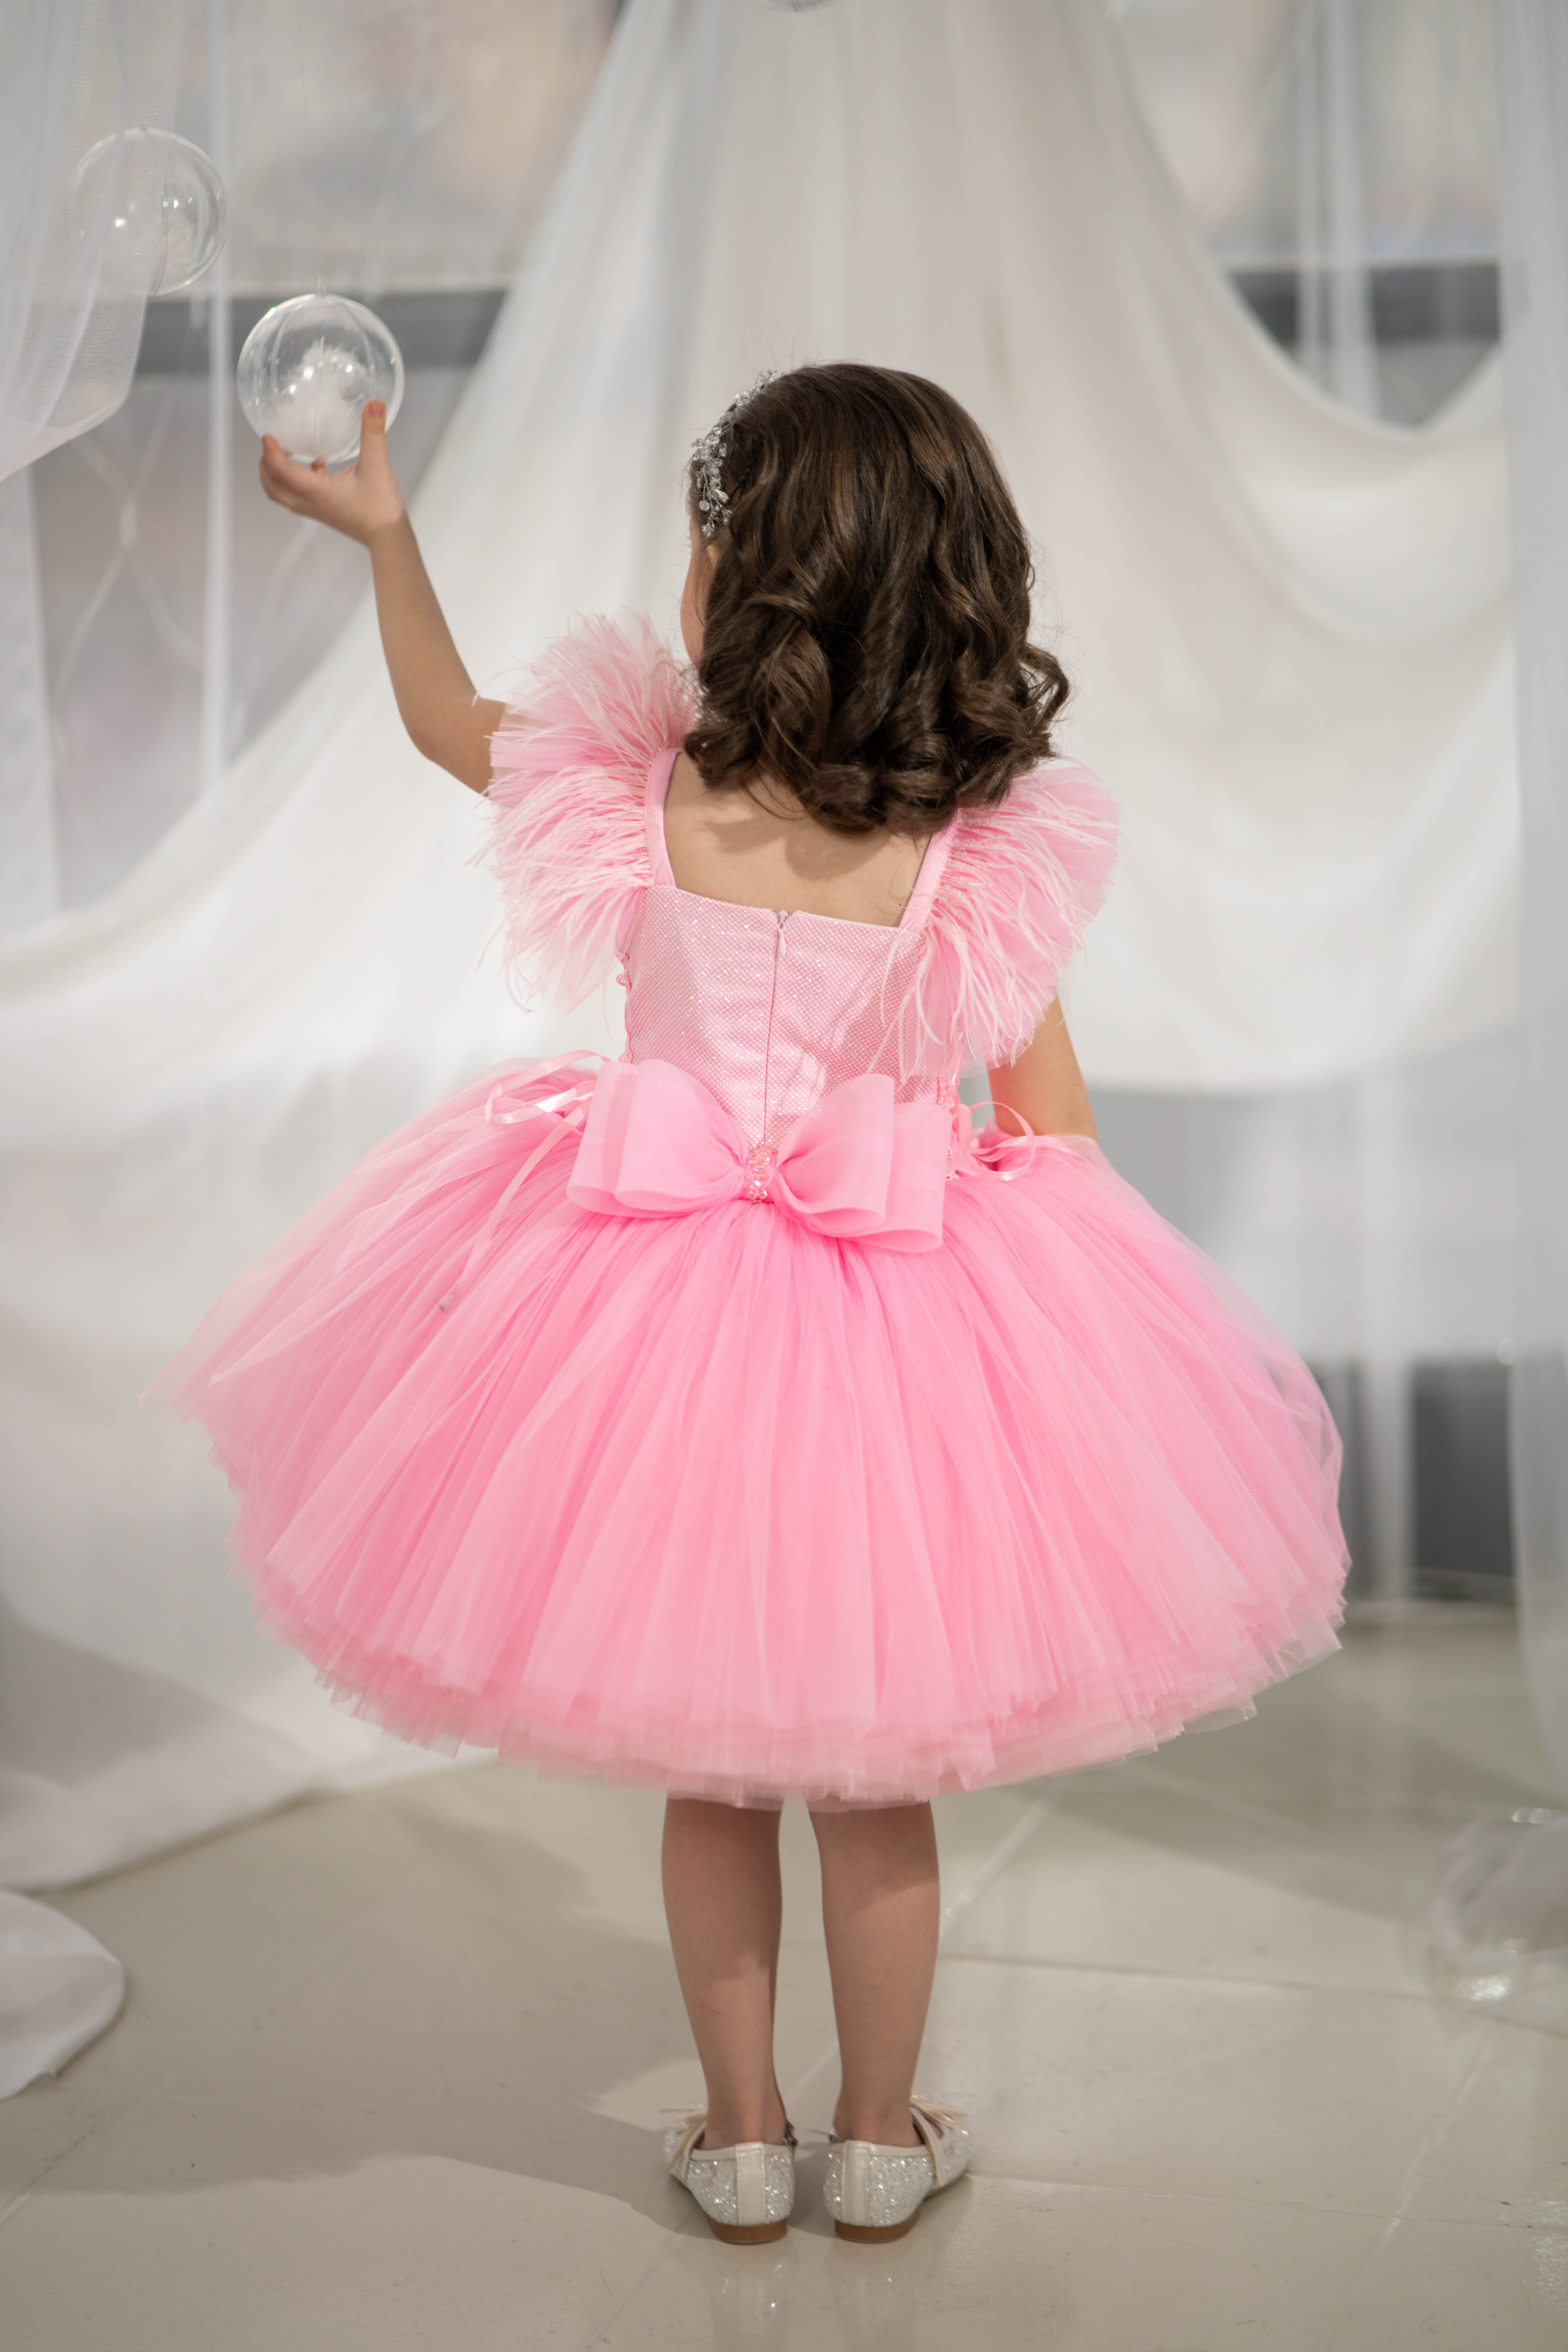 Princess Dress (Size 1-2, Pink, In Stock).